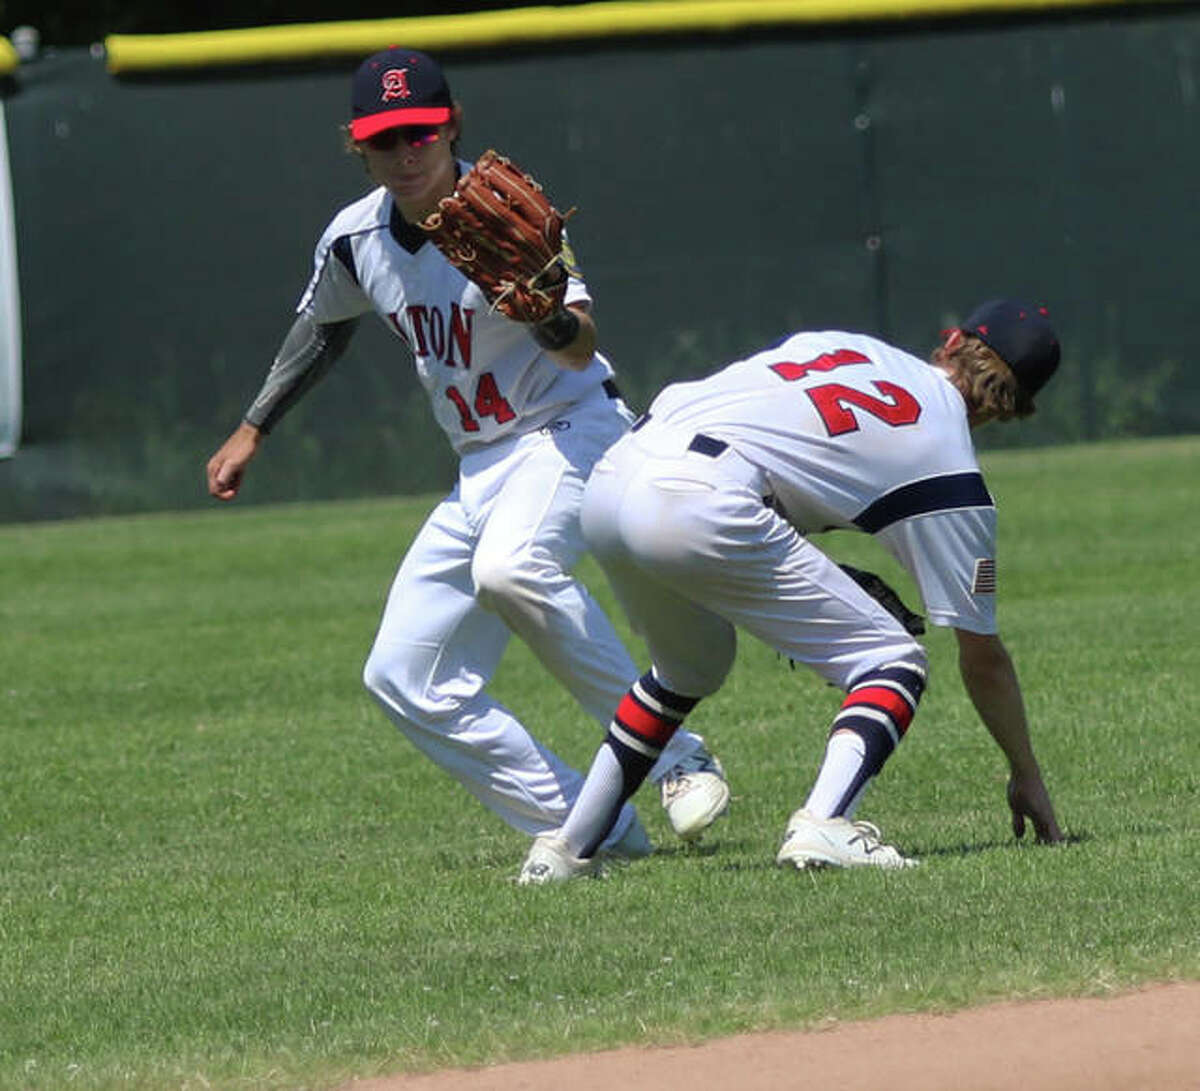 Alton’s Preston Schepers, left, went 4 for 4 at the plate with a double, two RBIs and two runs scored in a 10-6 loss to Belleville Saturday in Belleville. He is shown in action last season.